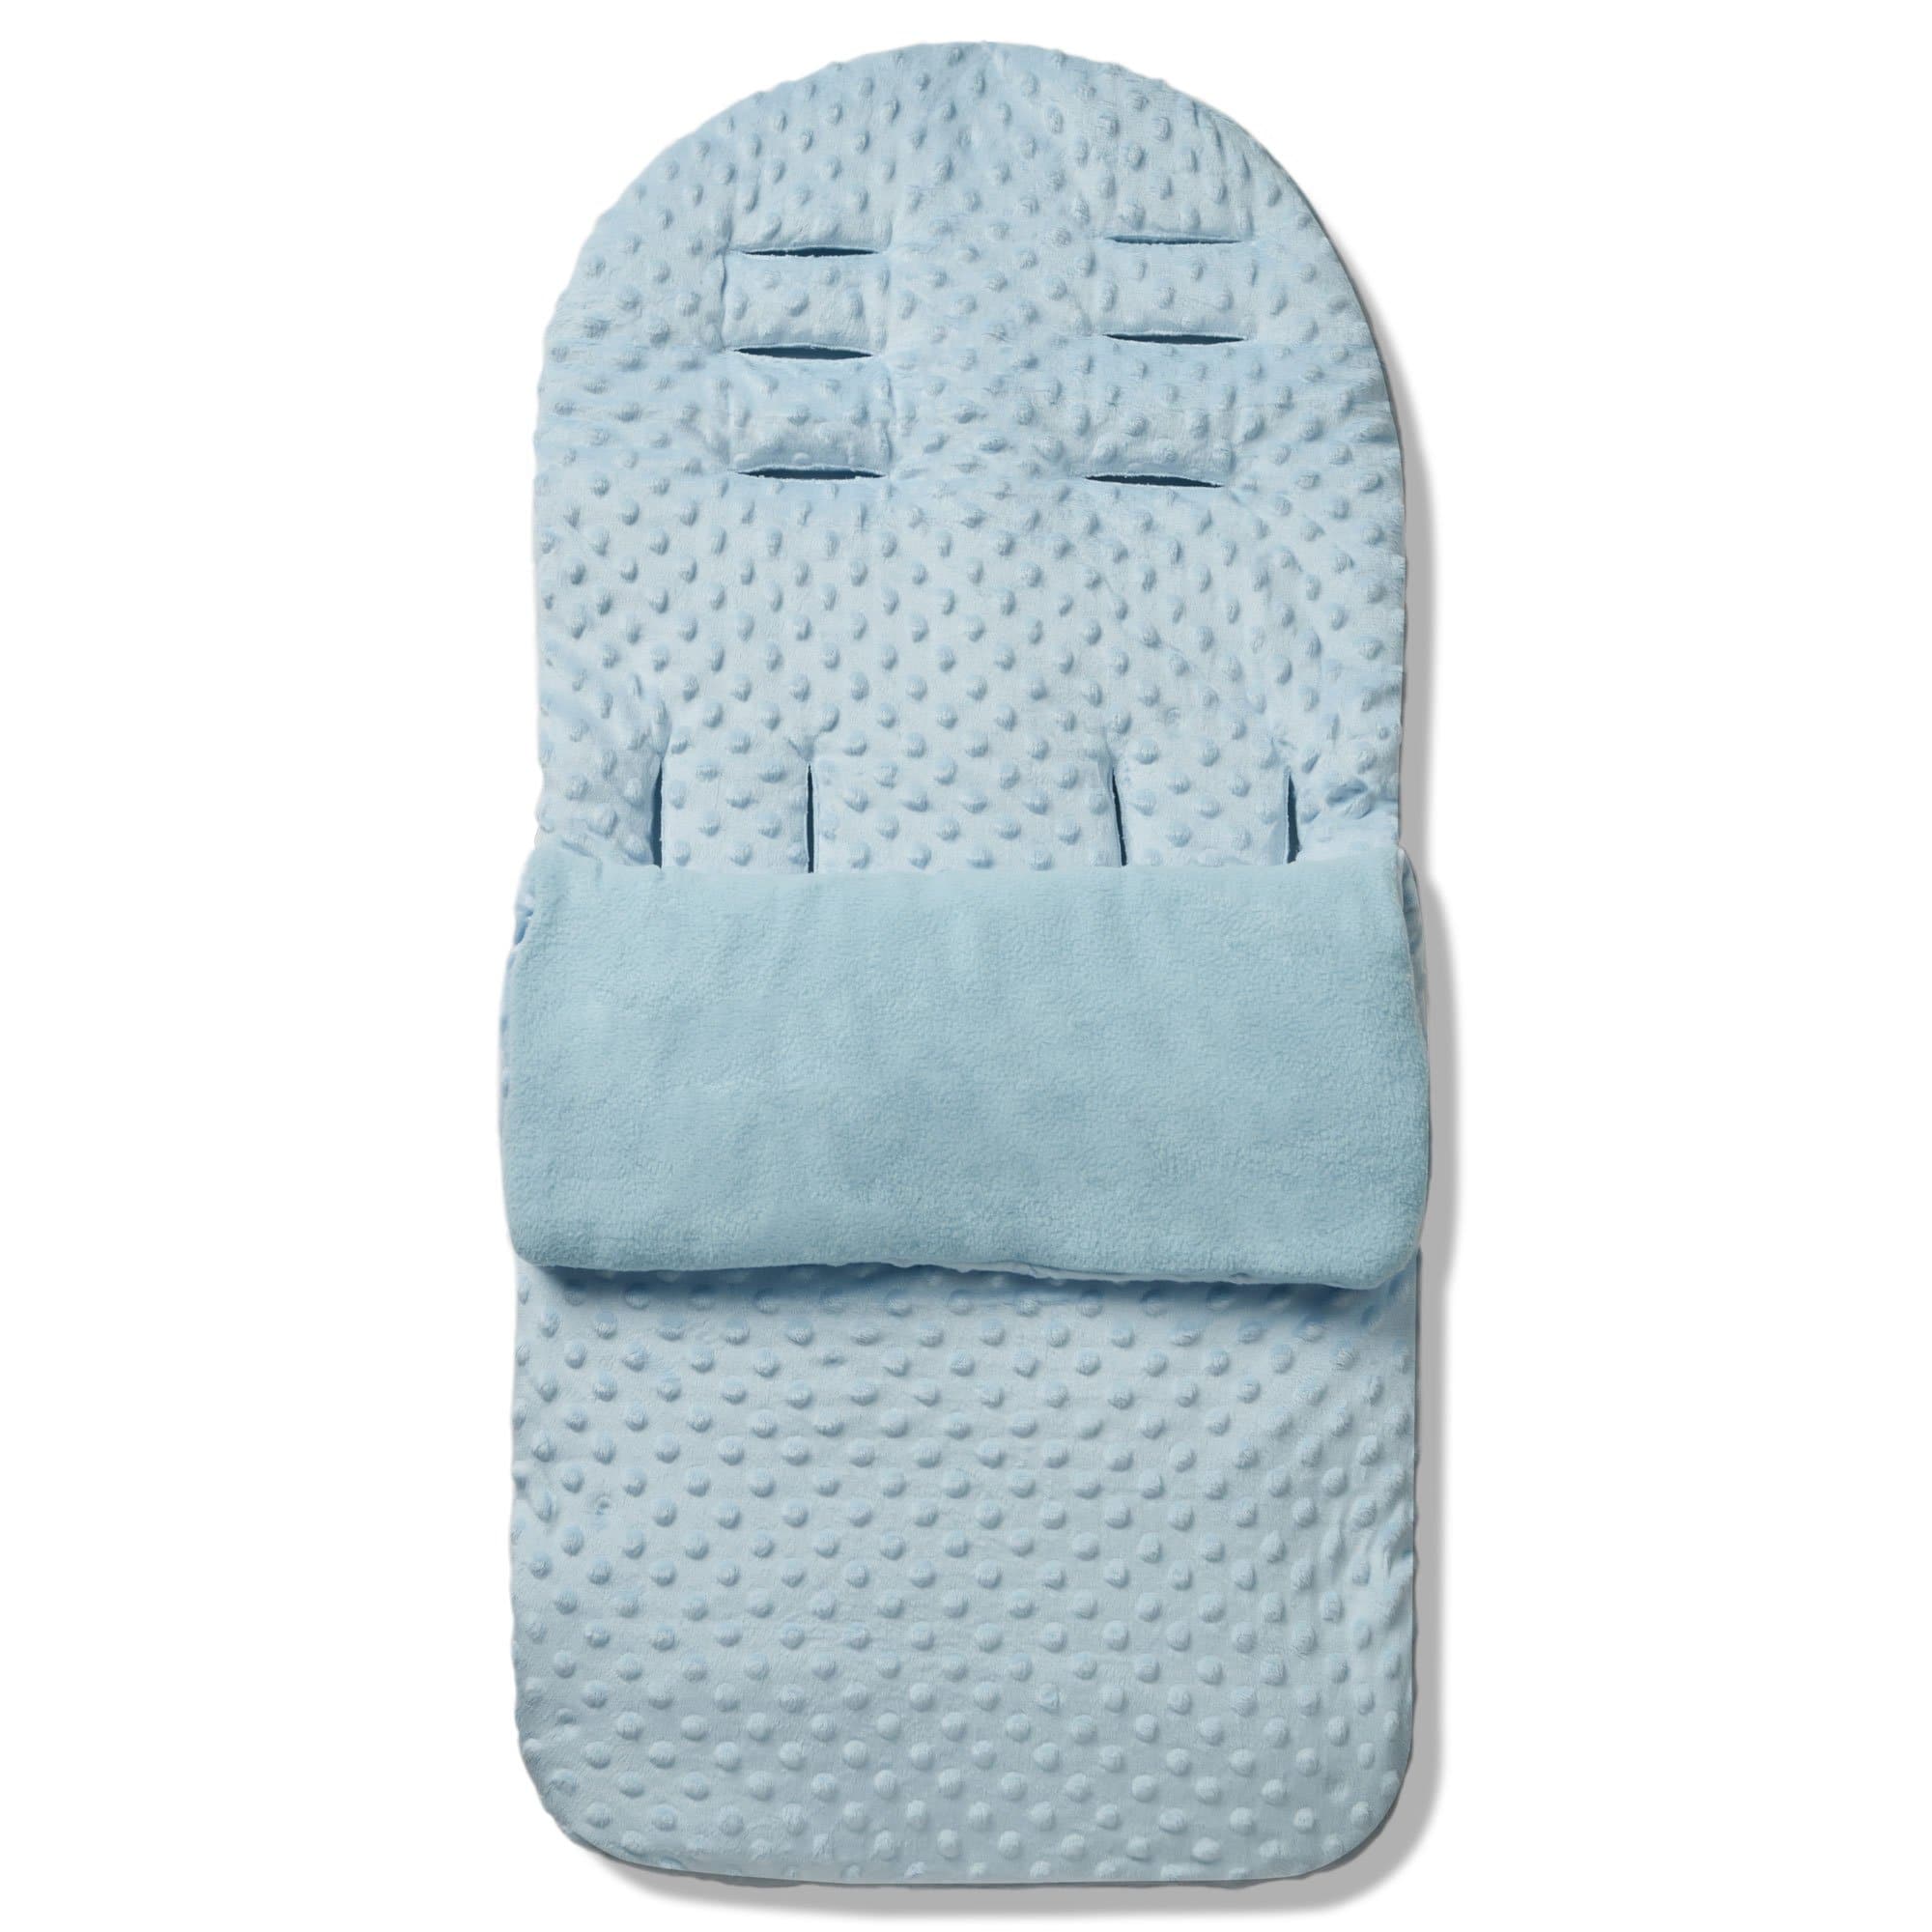 Dimple Footmuff / Cosy Toes Compatible with Silver Cross - Blue / Fits All Models | For Your Little One